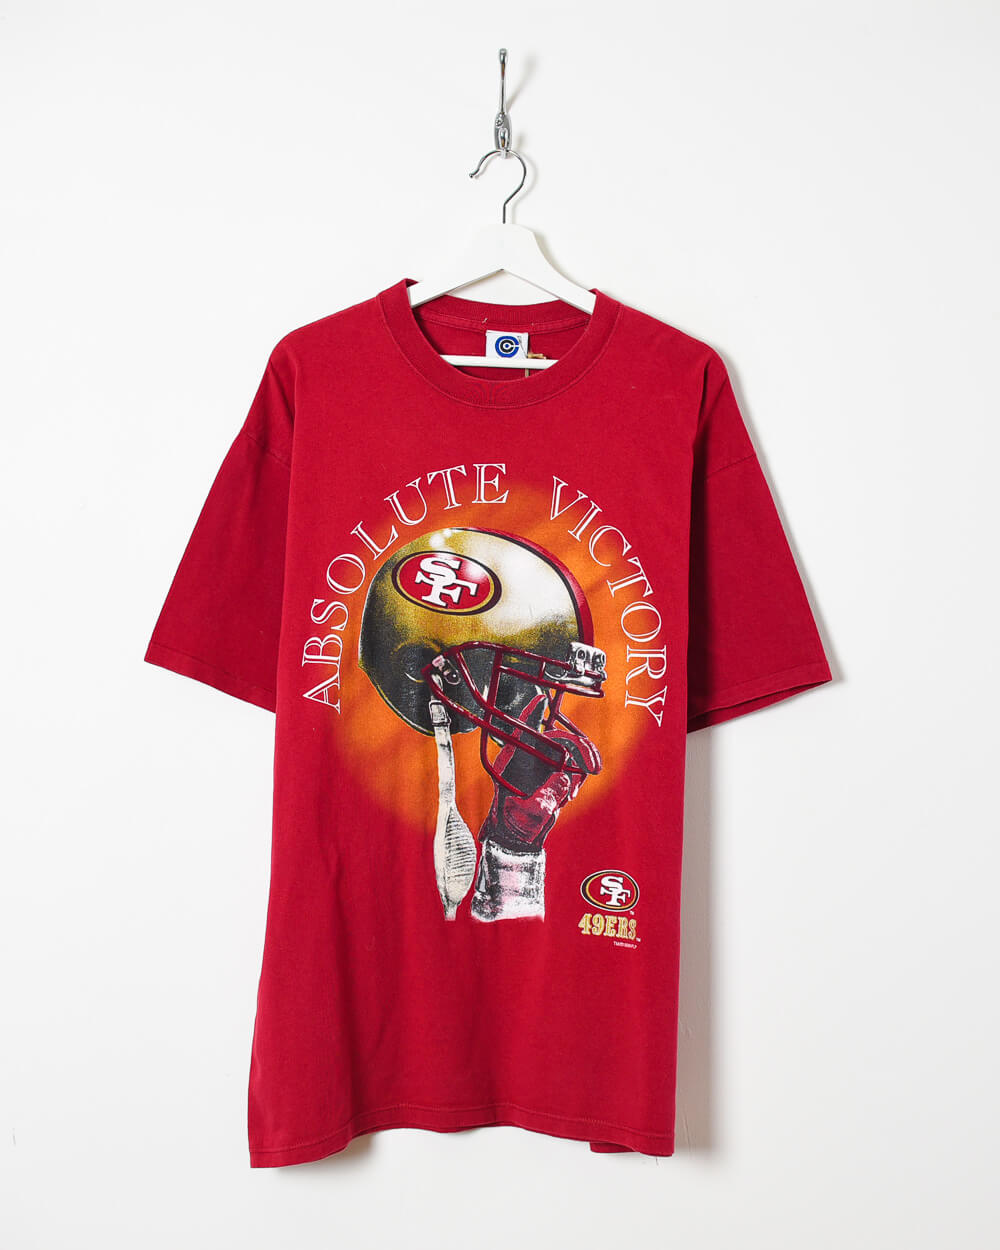 College Concepts Absolute Victory 49ers T-Shirt - X-Large - Domno Vintage 90s, 80s, 00s Retro and Vintage Clothing 